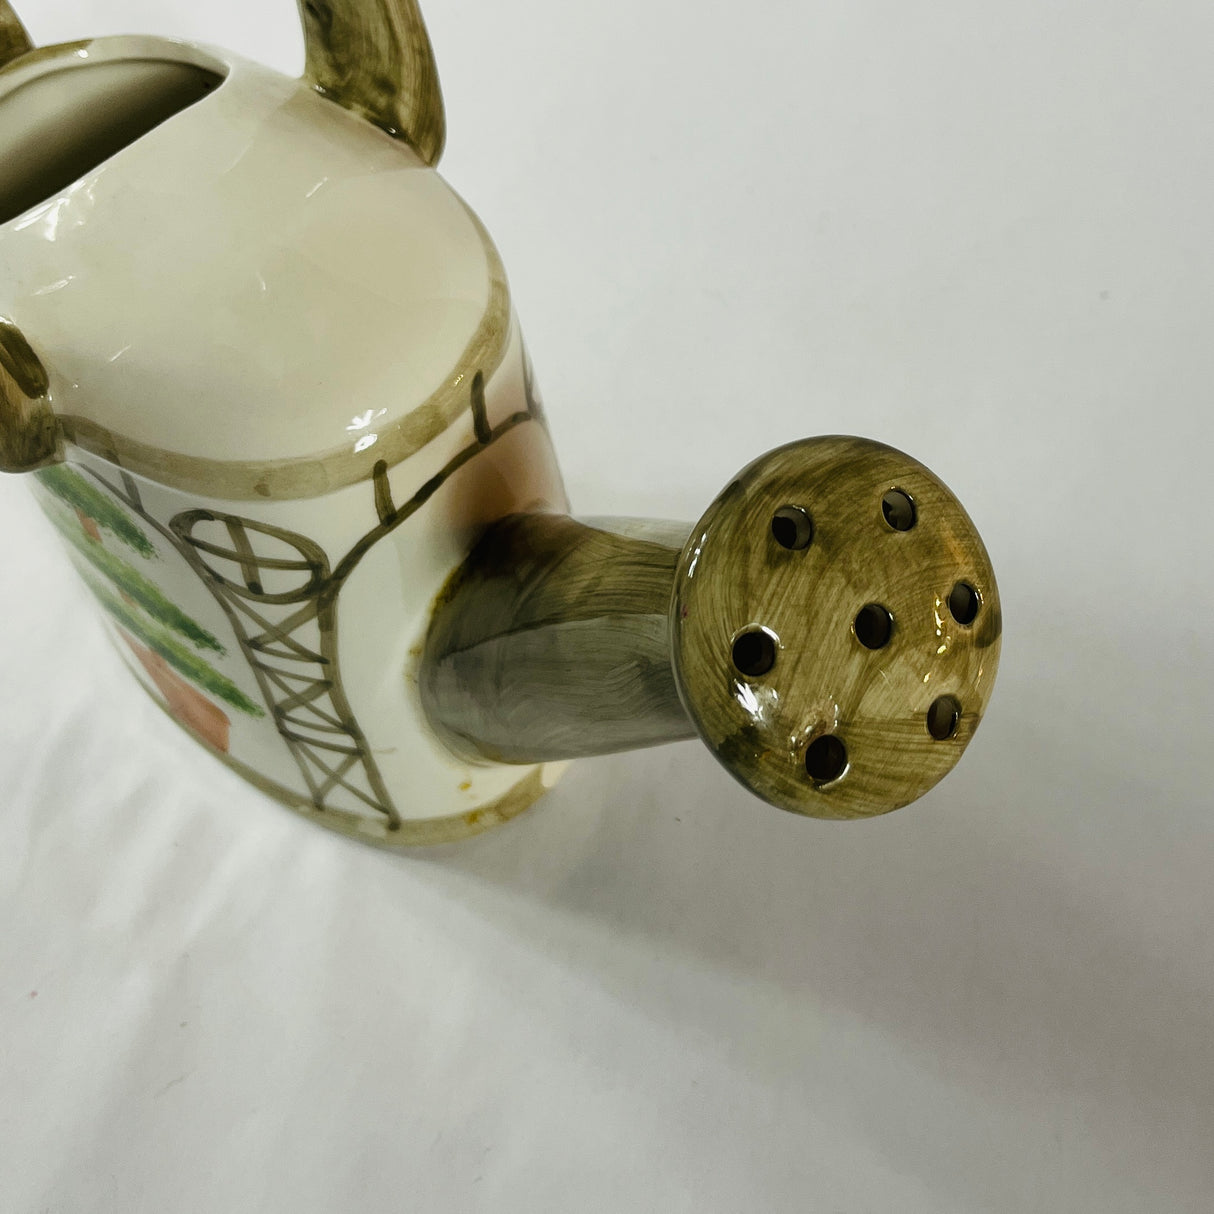 Topiary-Decorated Ceramic Watering Can